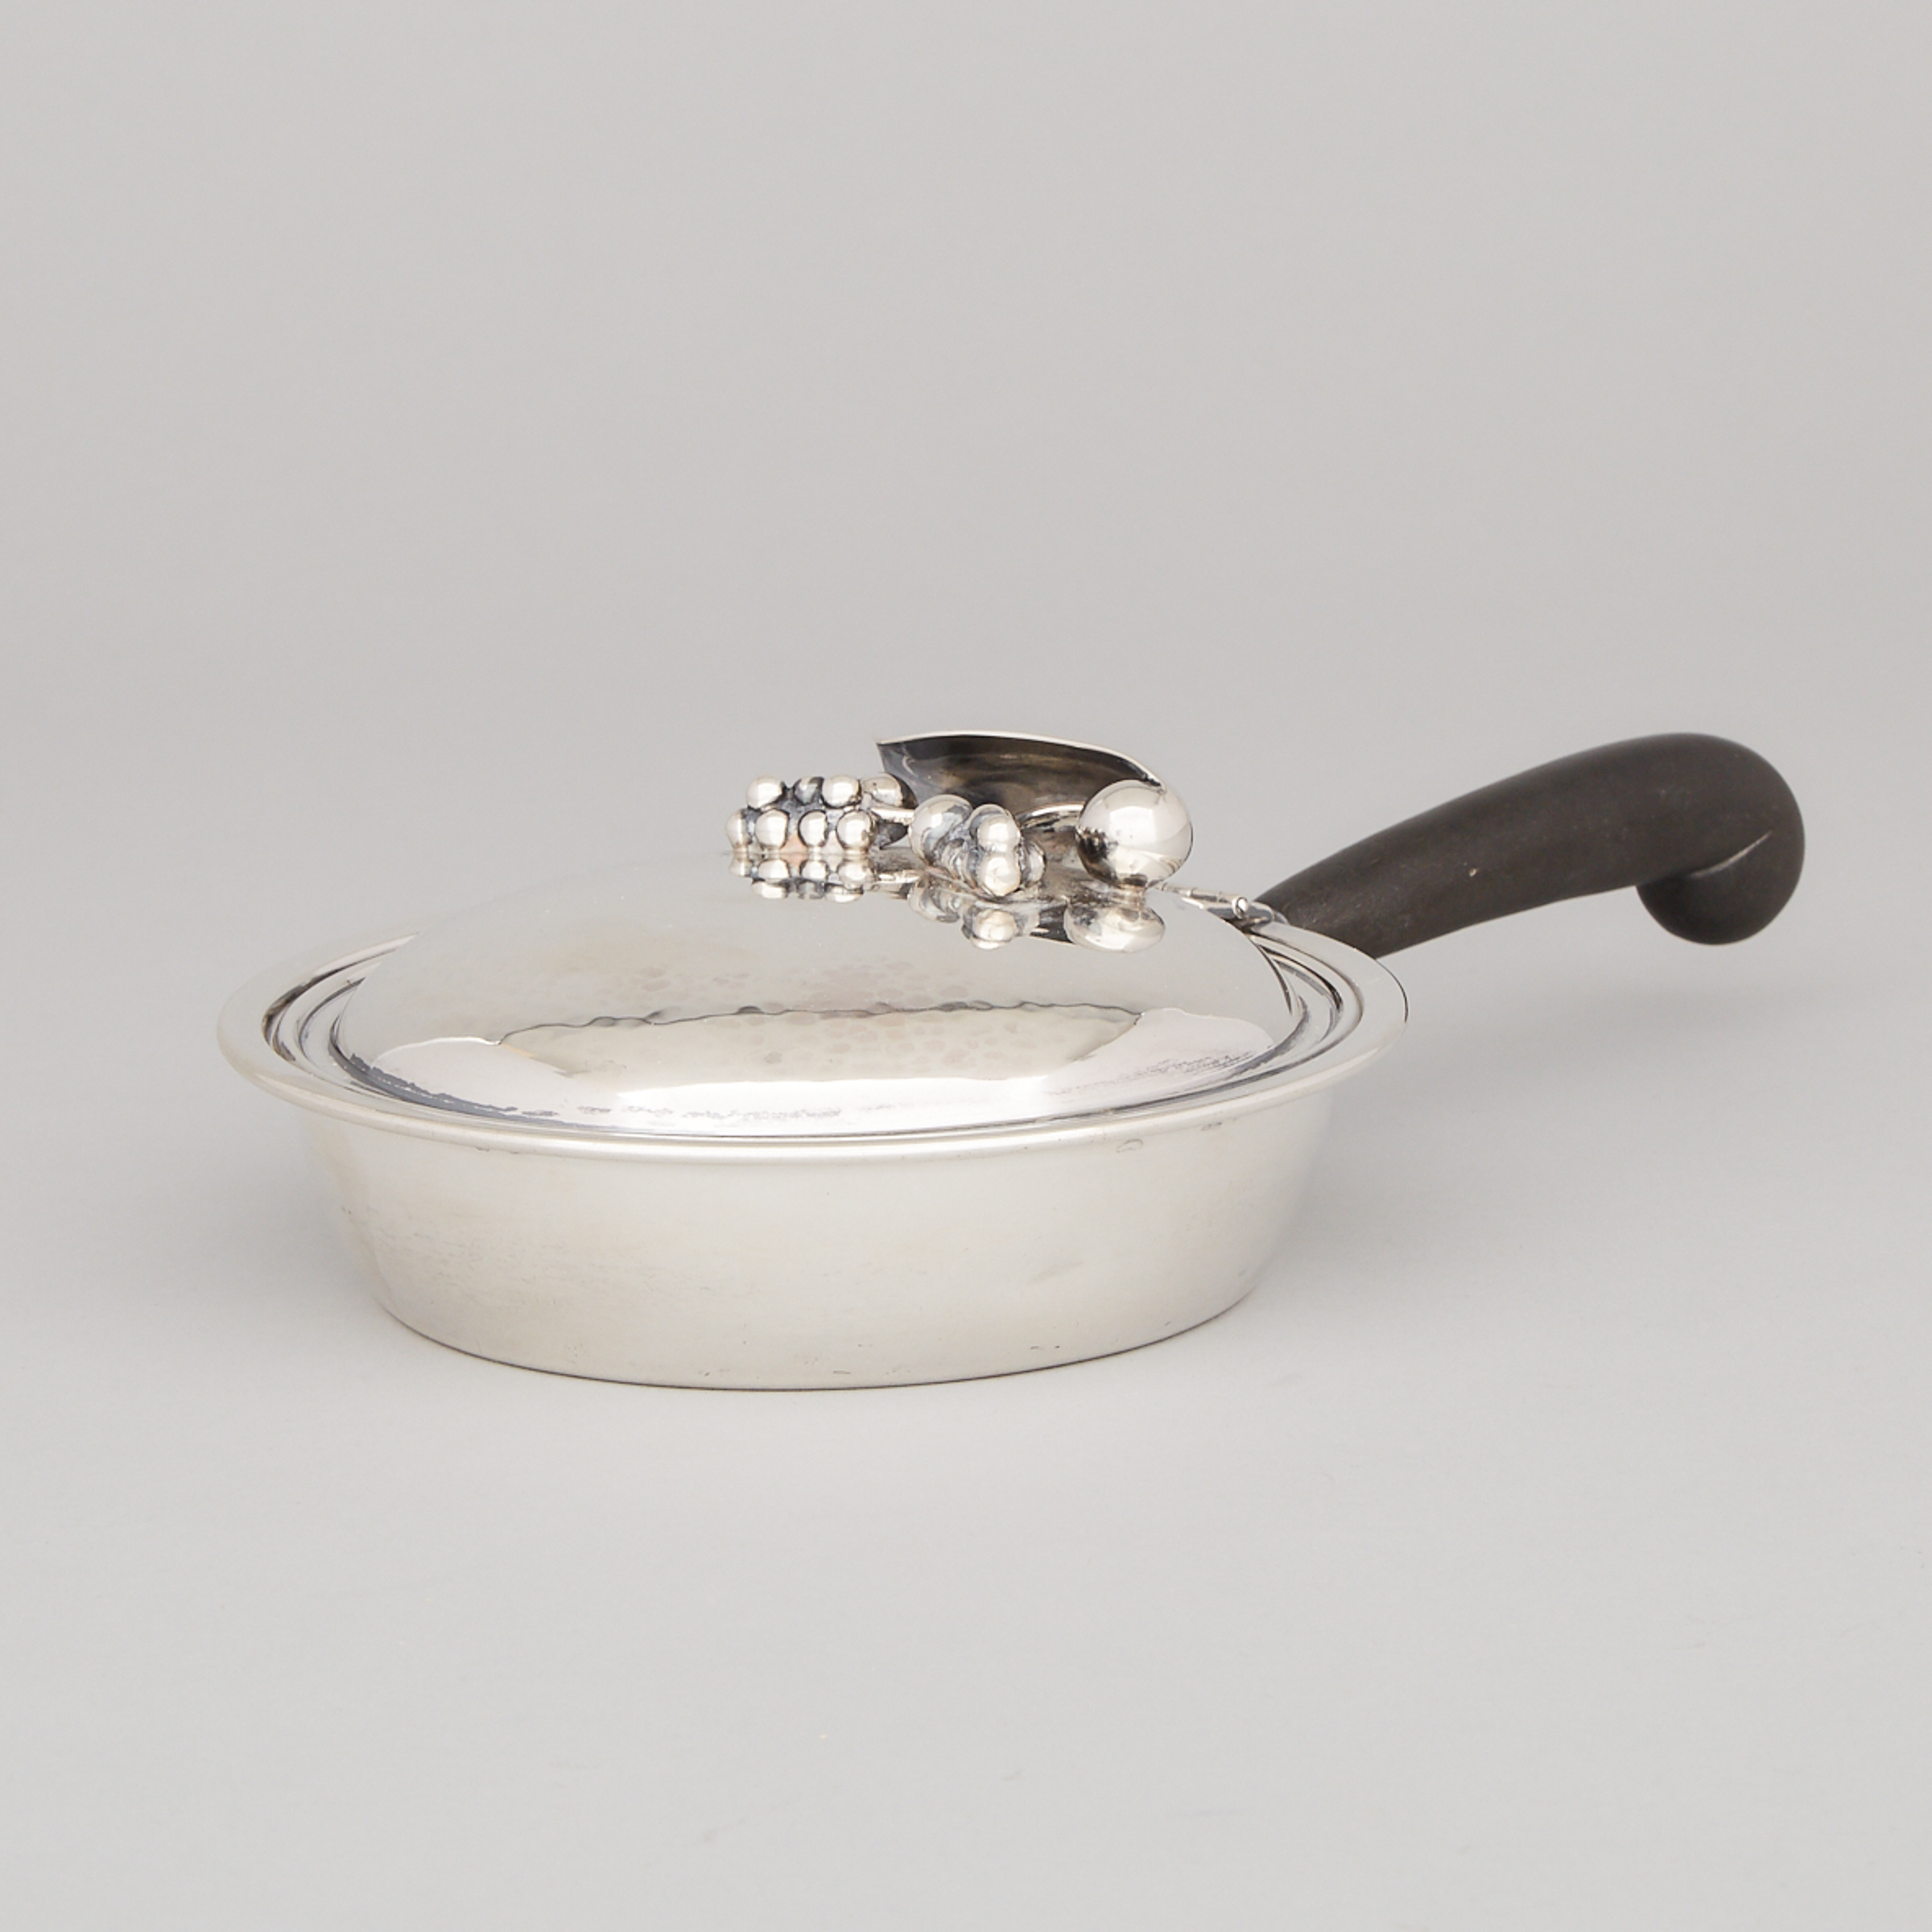 Canadian Silver Silent Butler, Carl Poul Petersen, Montreal, Que., mid-20th century